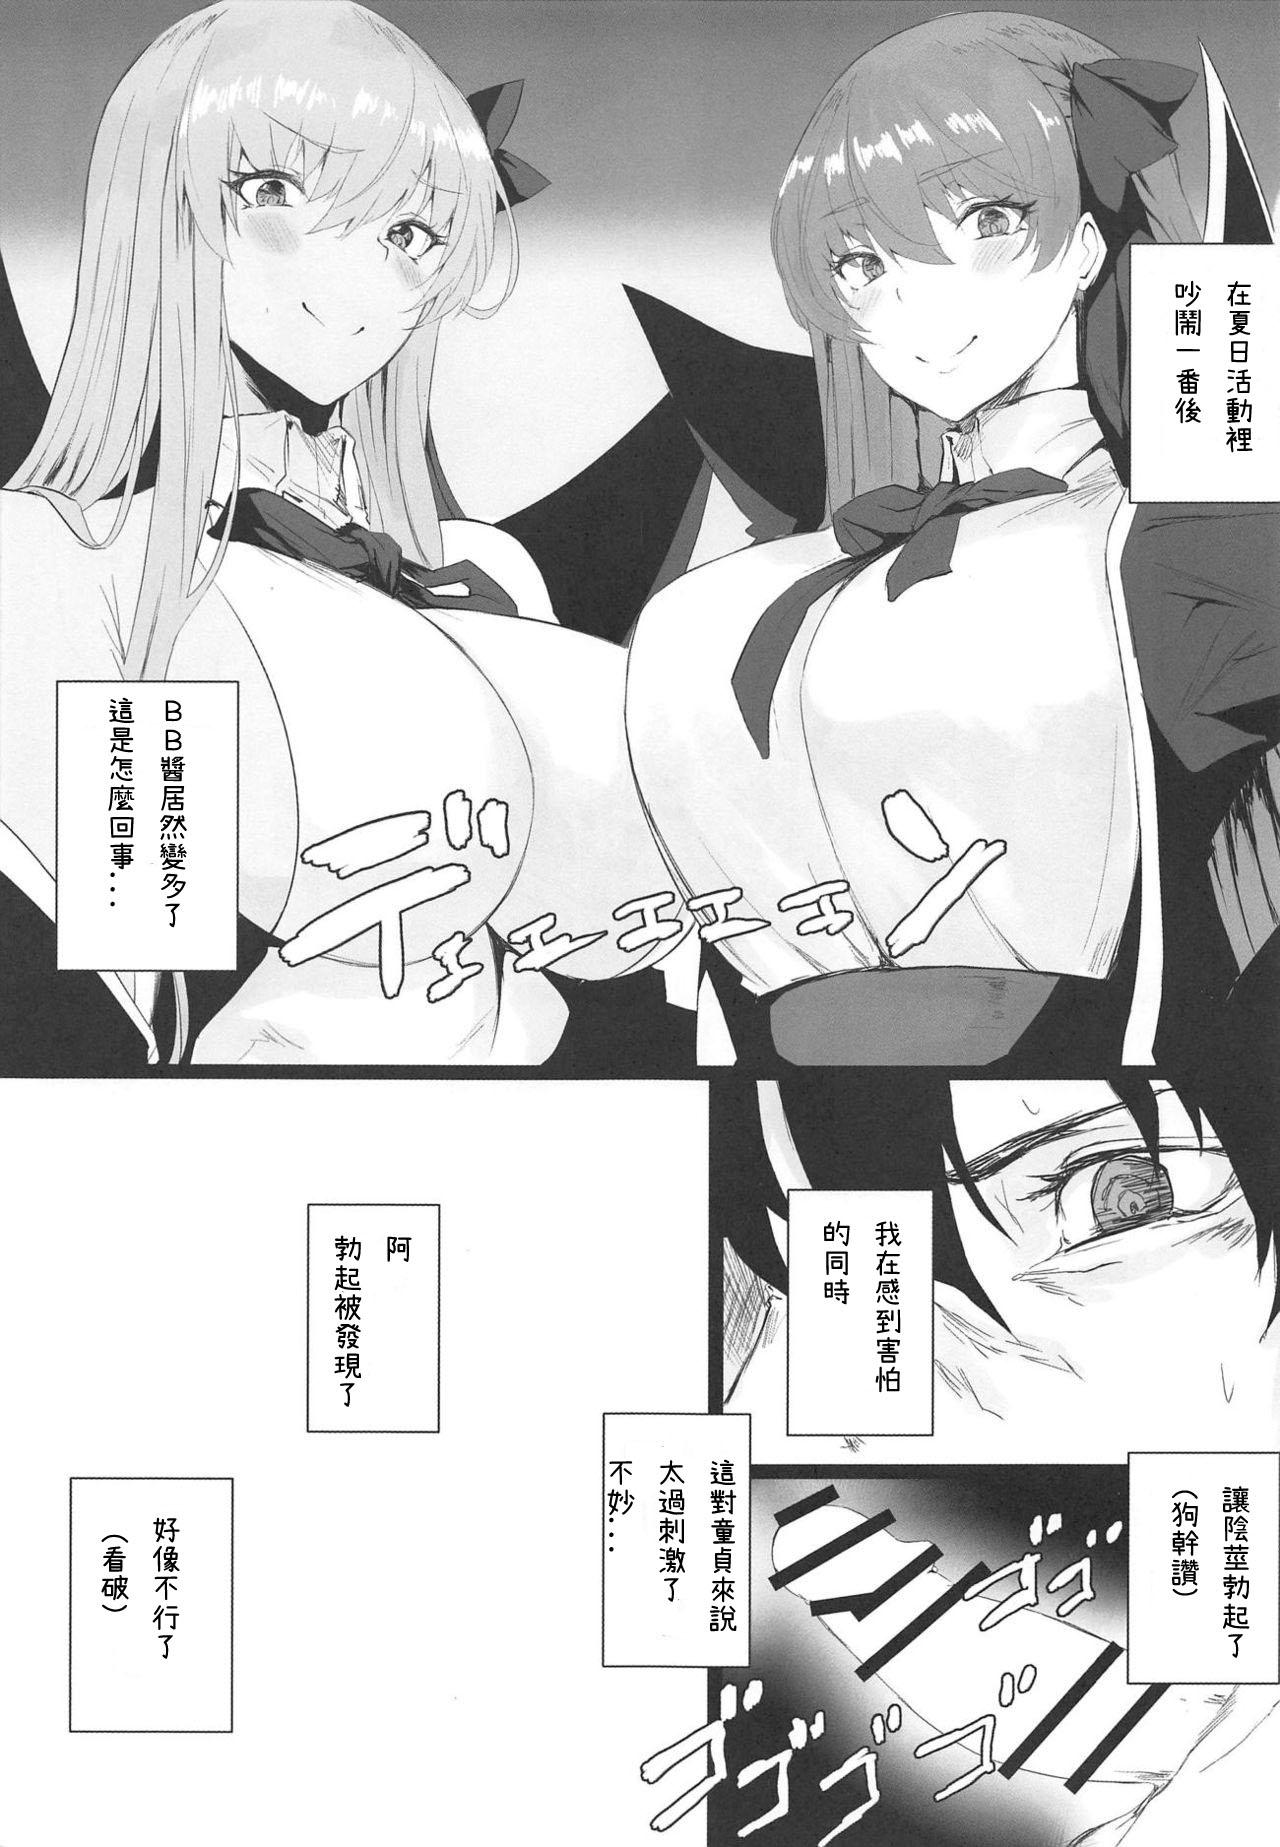 Punish VIOLATE A SANCTUARY - Fate grand order Hot Girl - Page 2